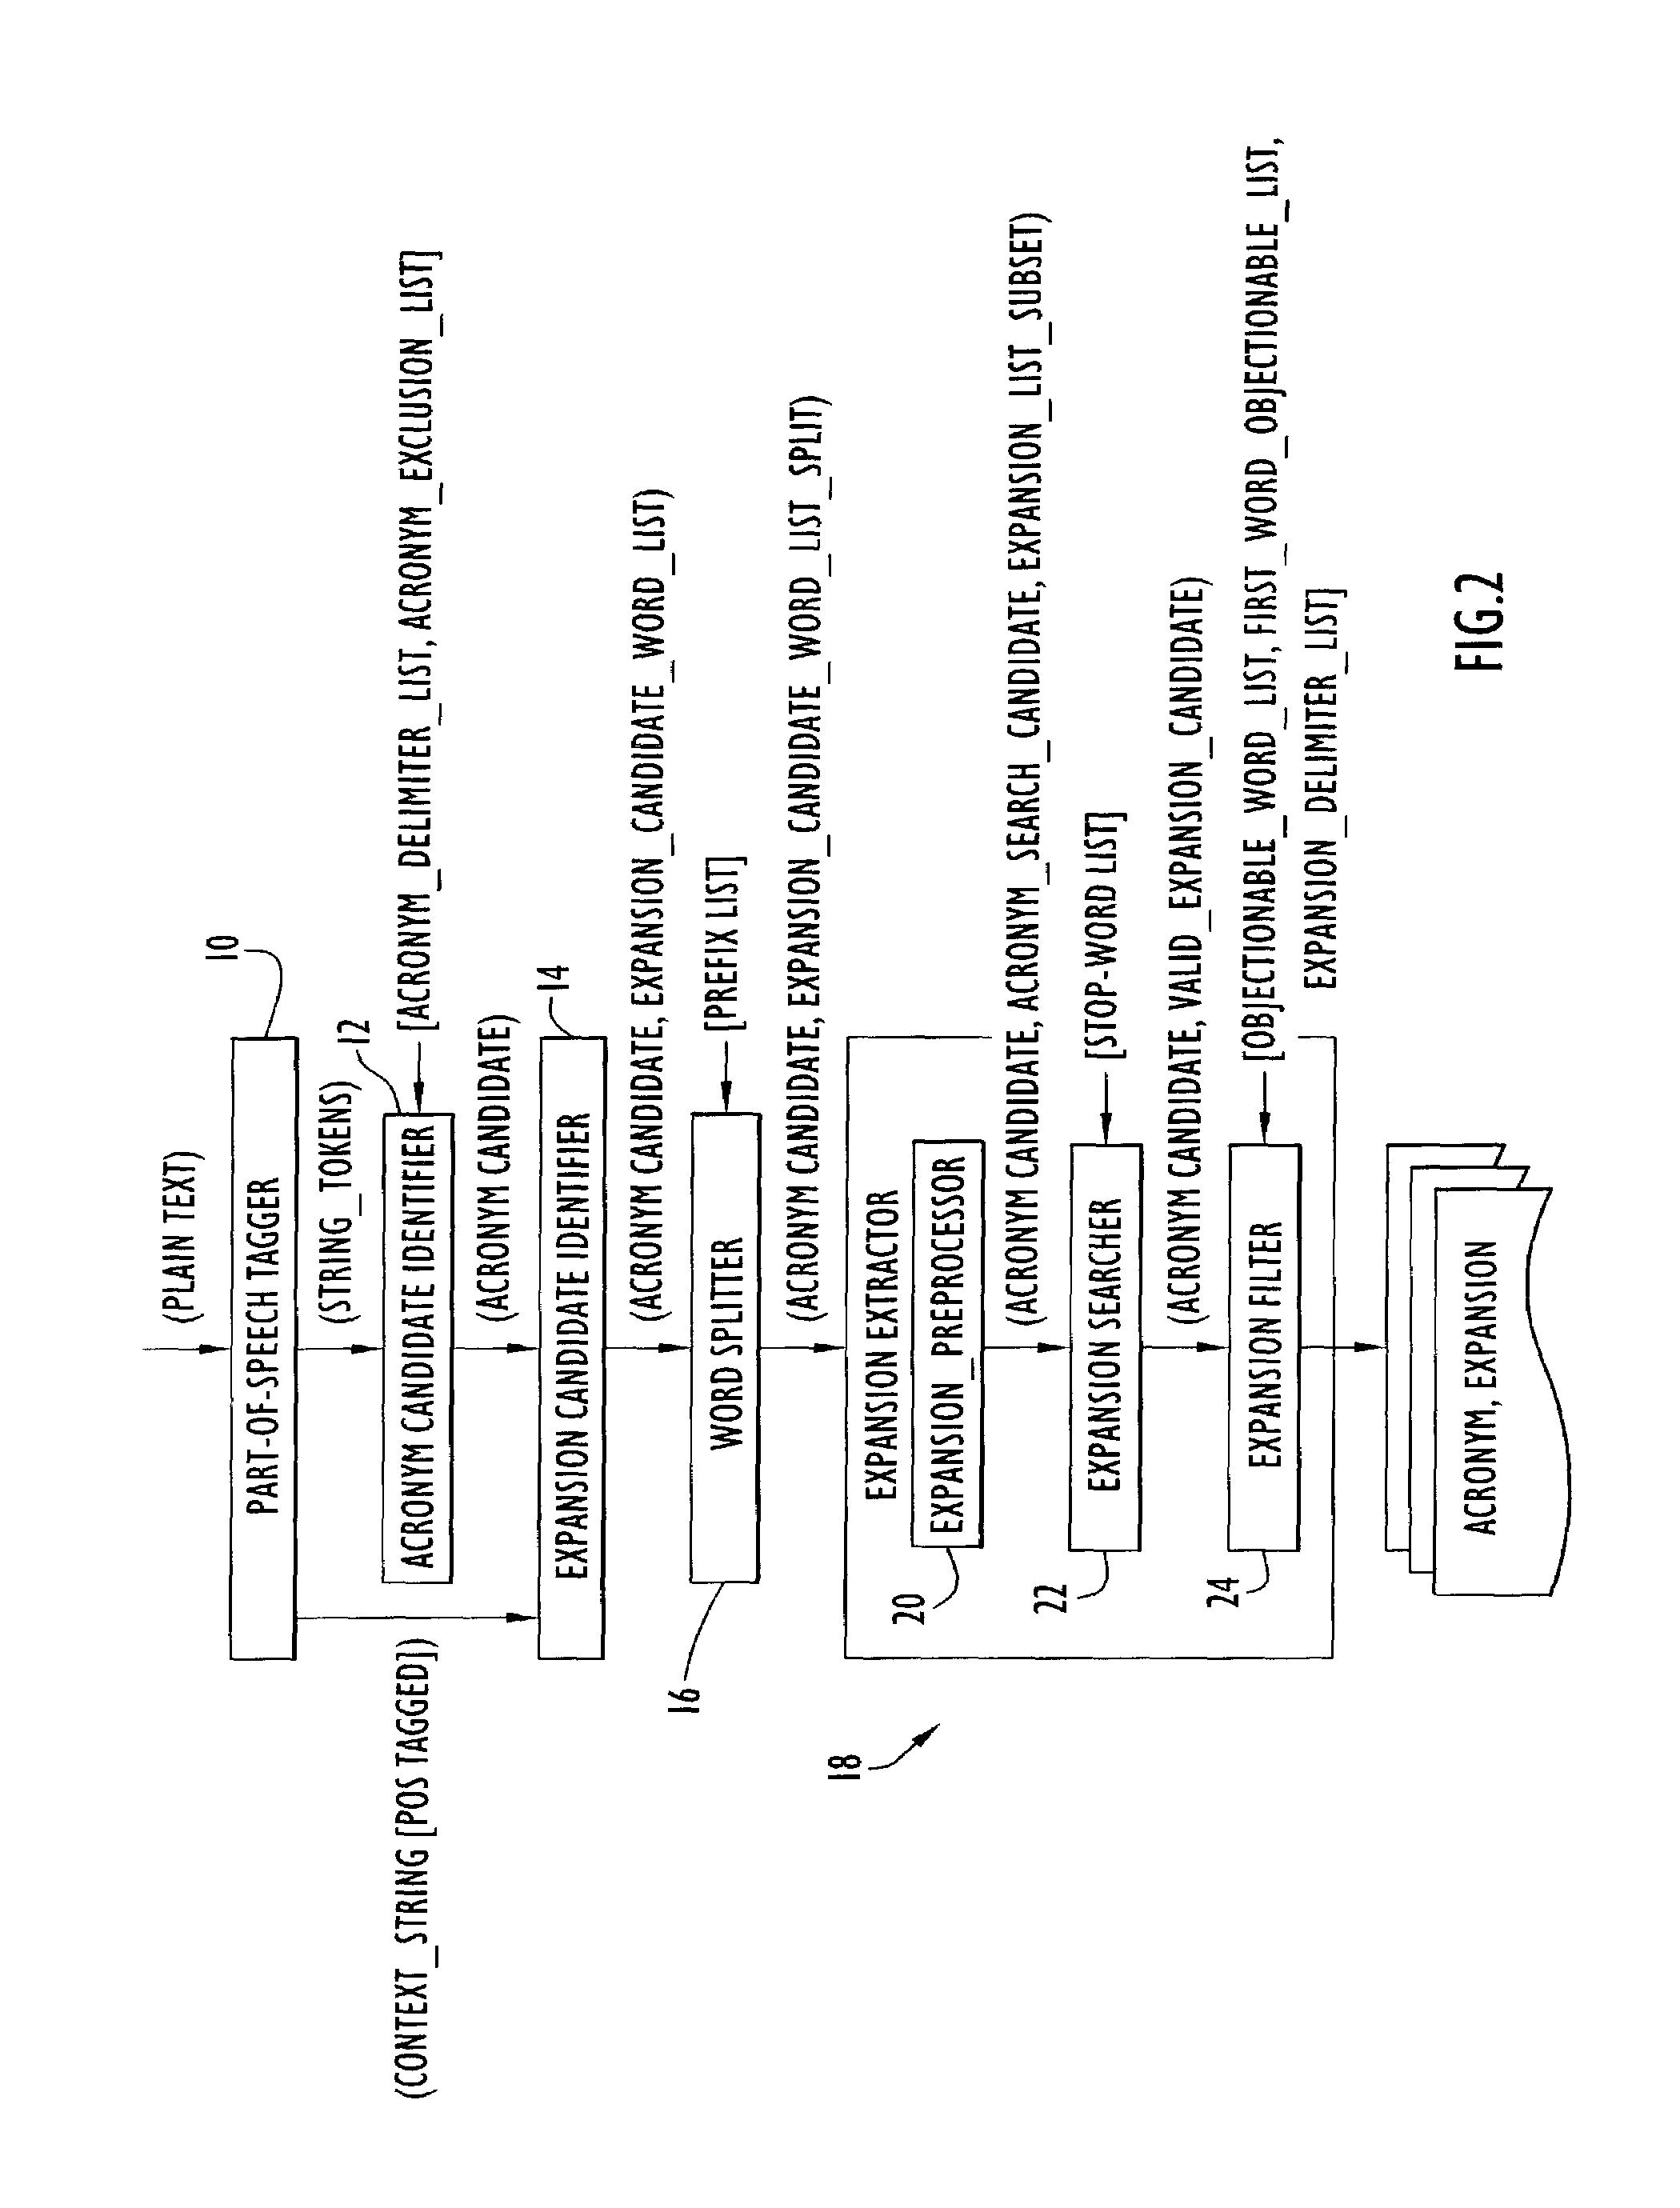 Acronym extraction system and method of identifying acronyms and extracting corresponding expansions from text